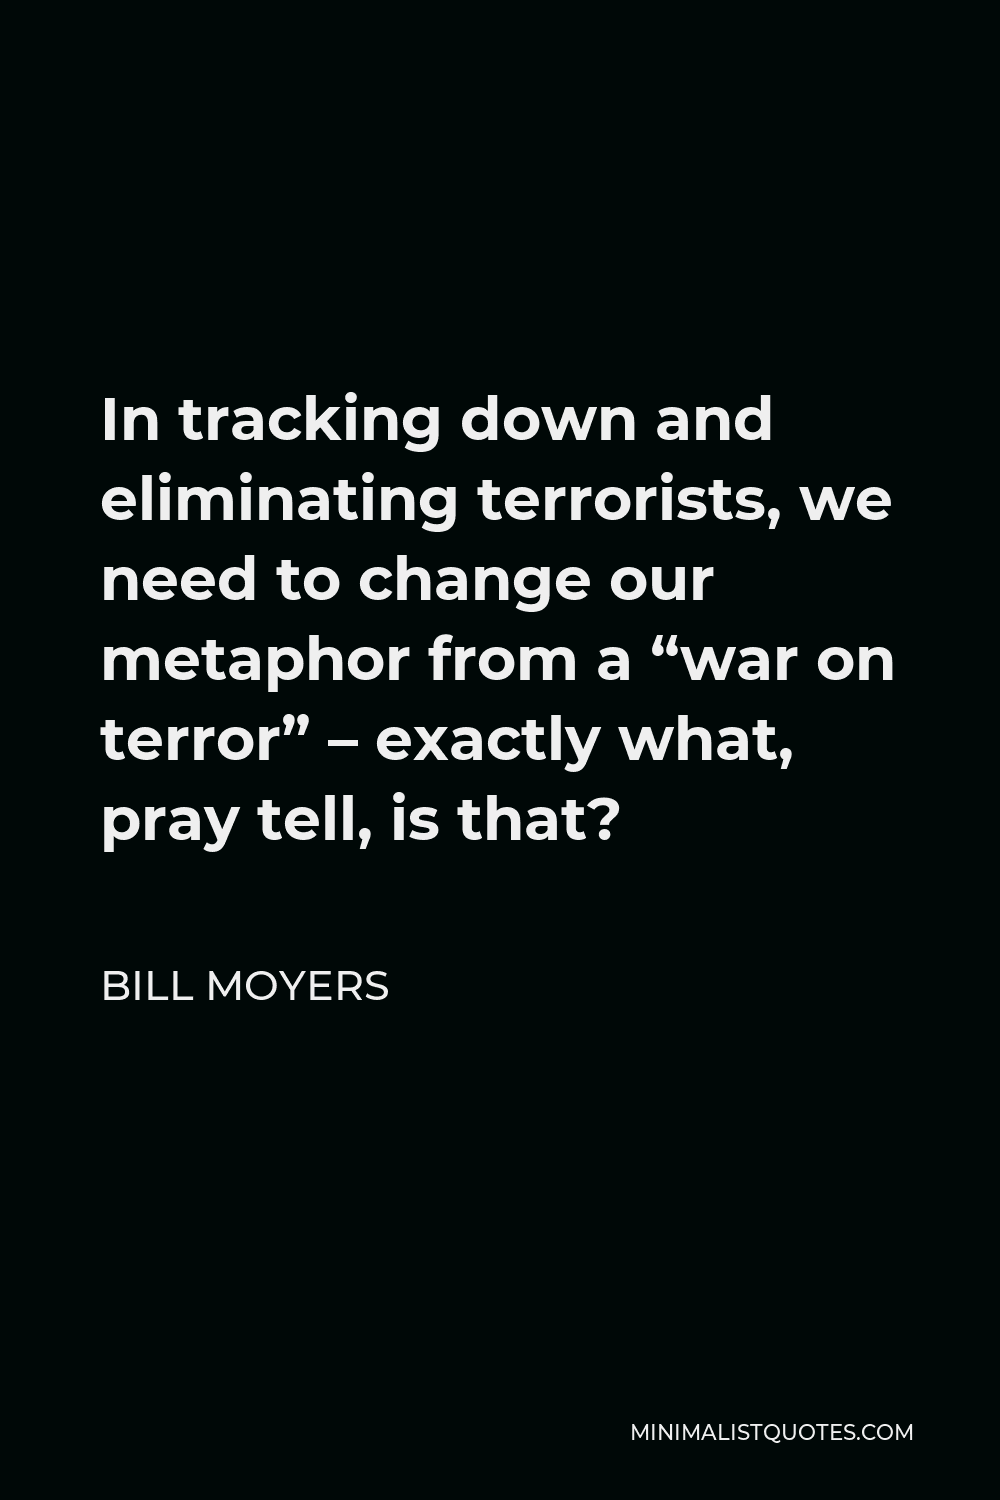 Bill Moyers Quote - In tracking down and eliminating terrorists, we need to change our metaphor from a “war on terror” – exactly what, pray tell, is that?